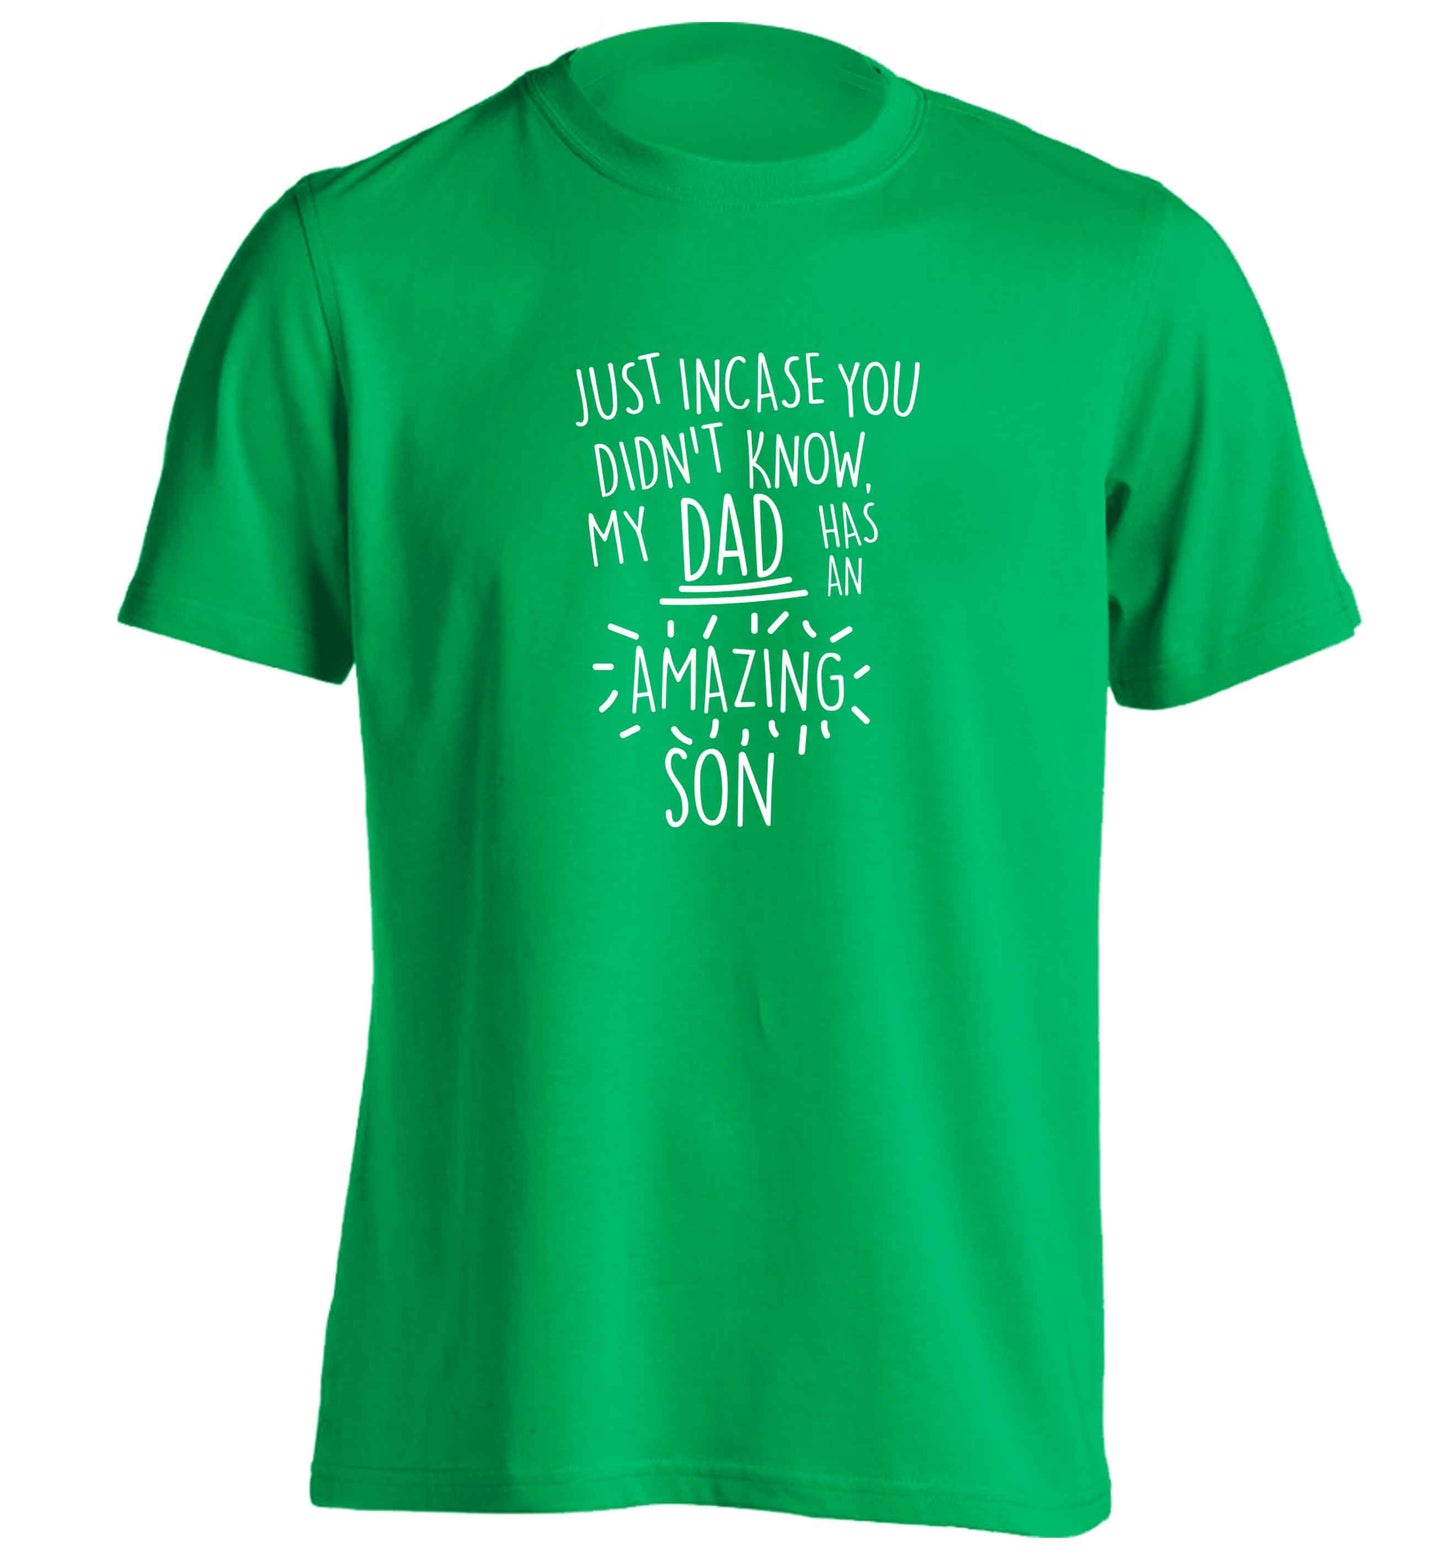 Just incase you didn't know my dad has an amazing son adults unisex green Tshirt 2XL